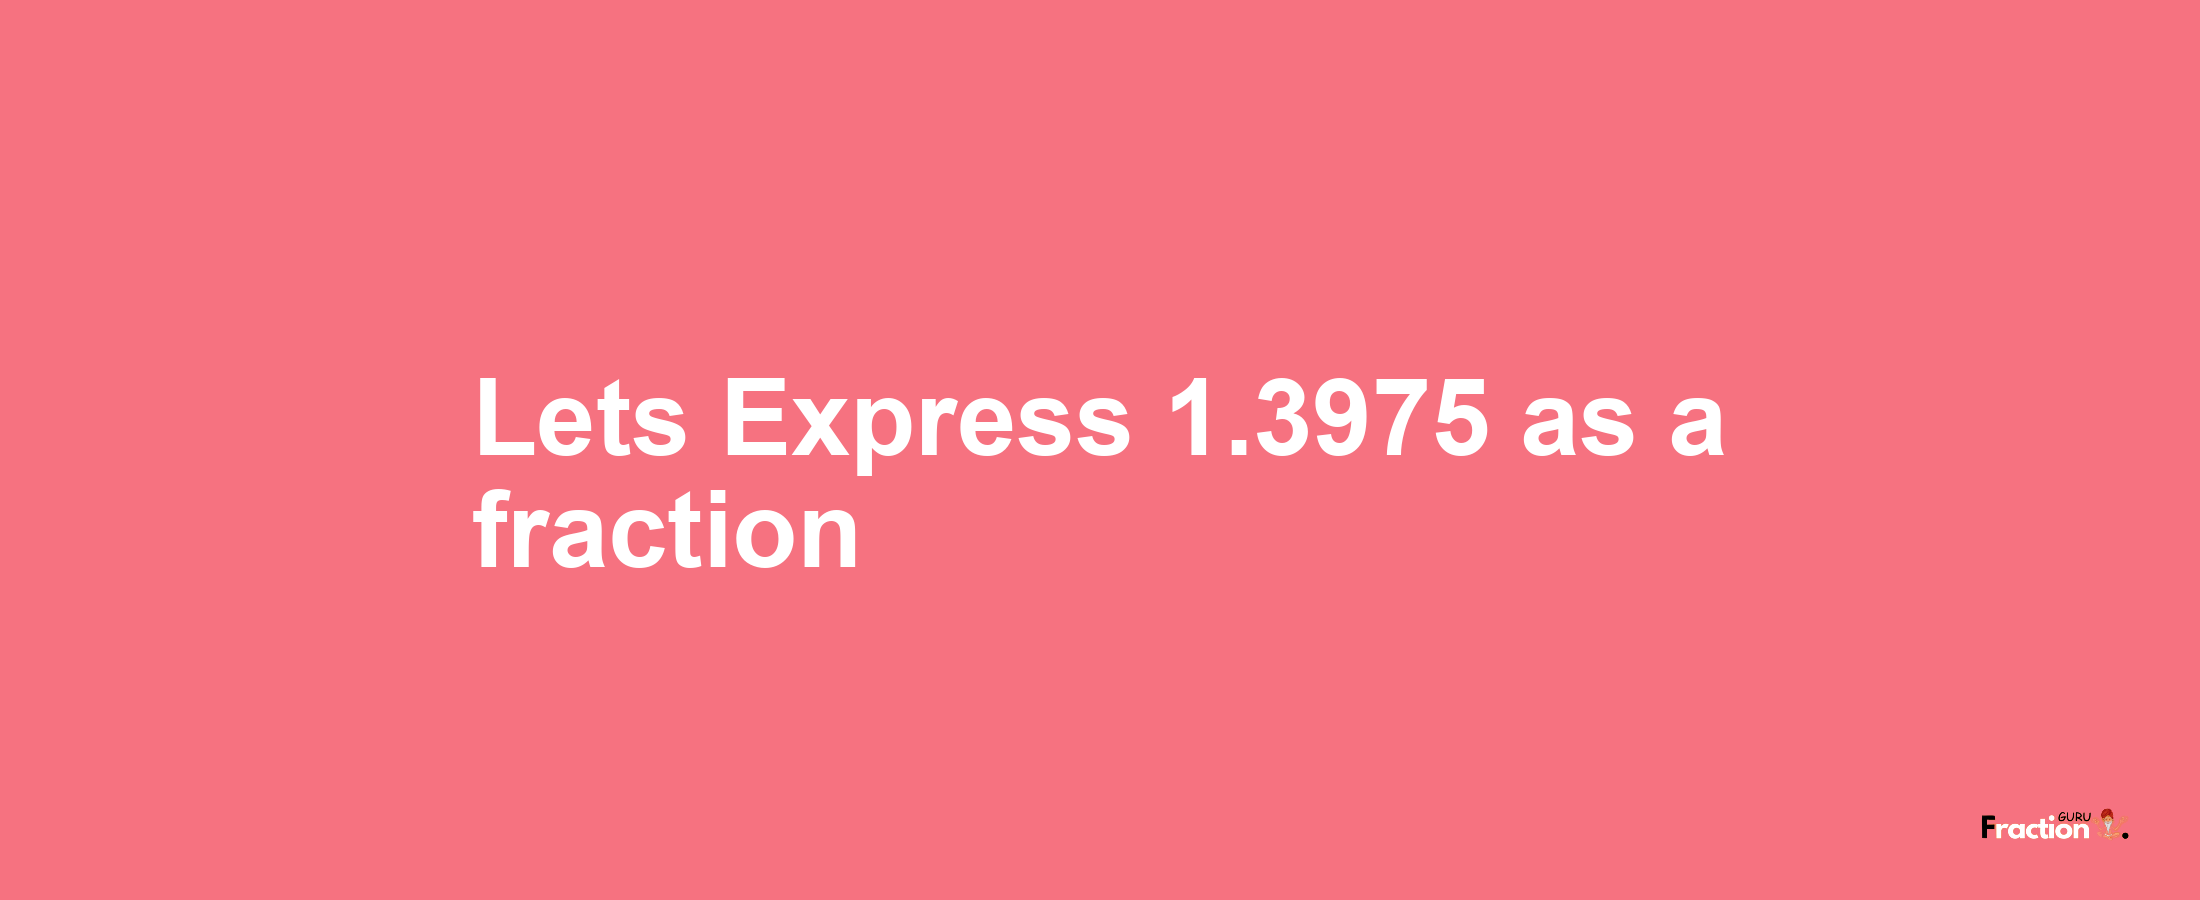 Lets Express 1.3975 as afraction